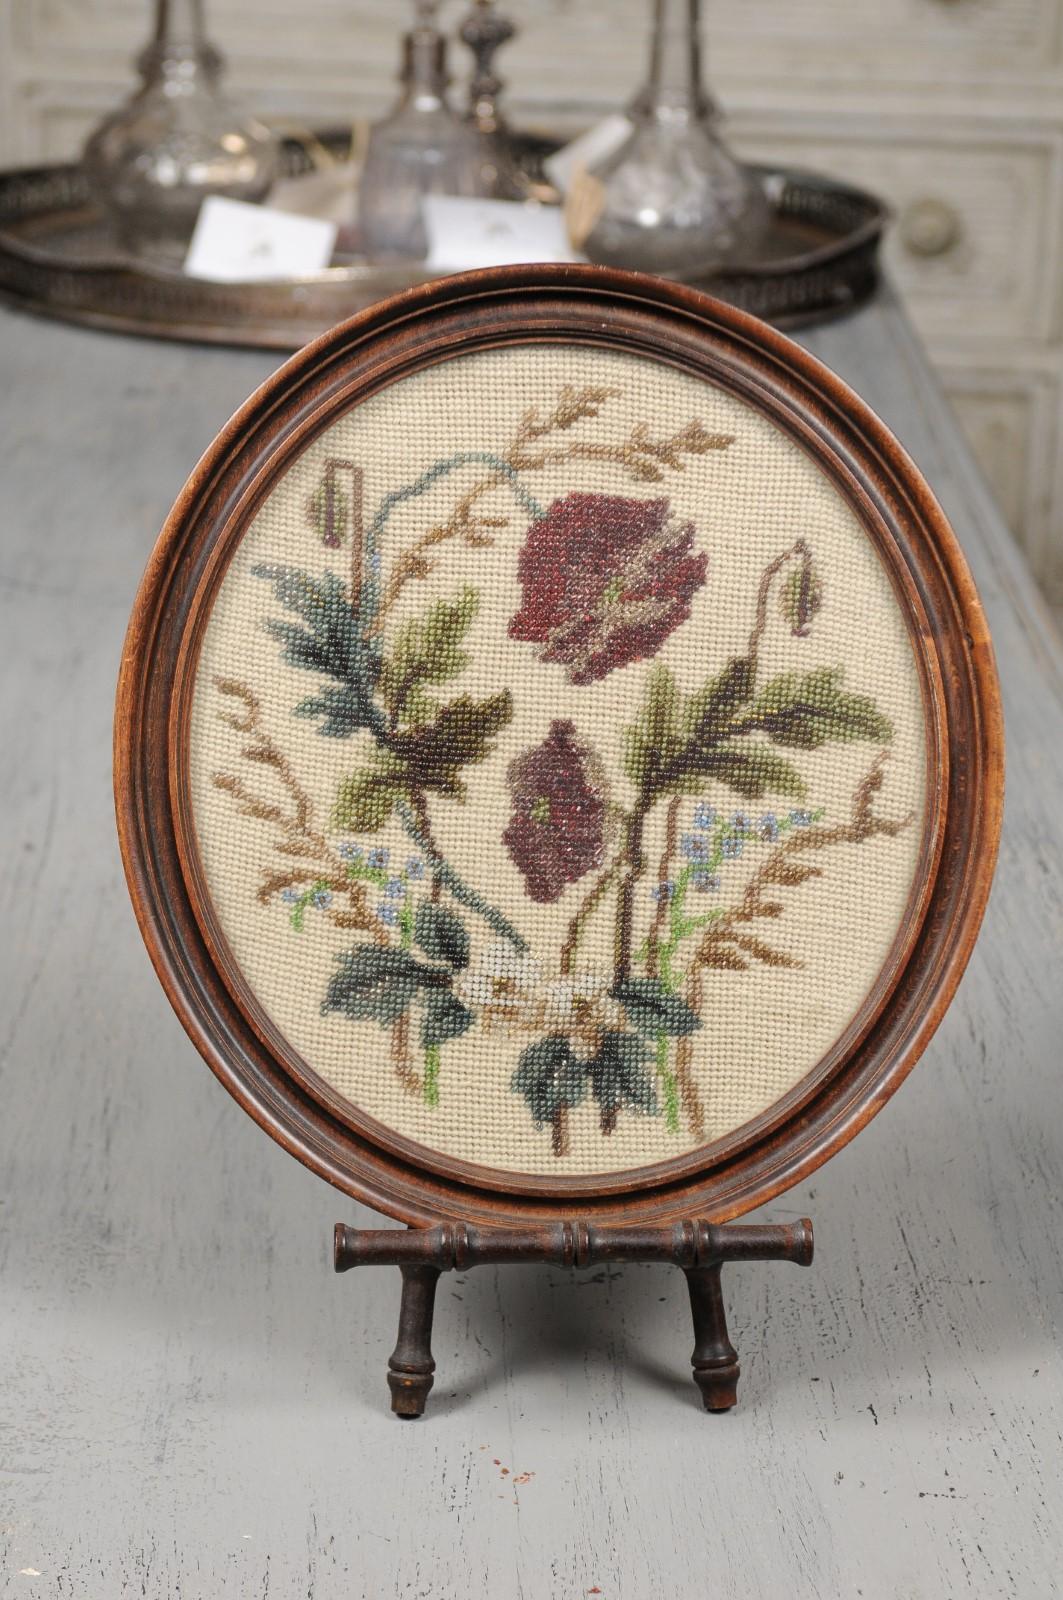 An English Victorian floral needlepoint and beading tapestry from the 19th century set in an oval frame and raised on a stand. Born in England during the reign of Queen Victoria, this charming decorative object features an oval wooden frame